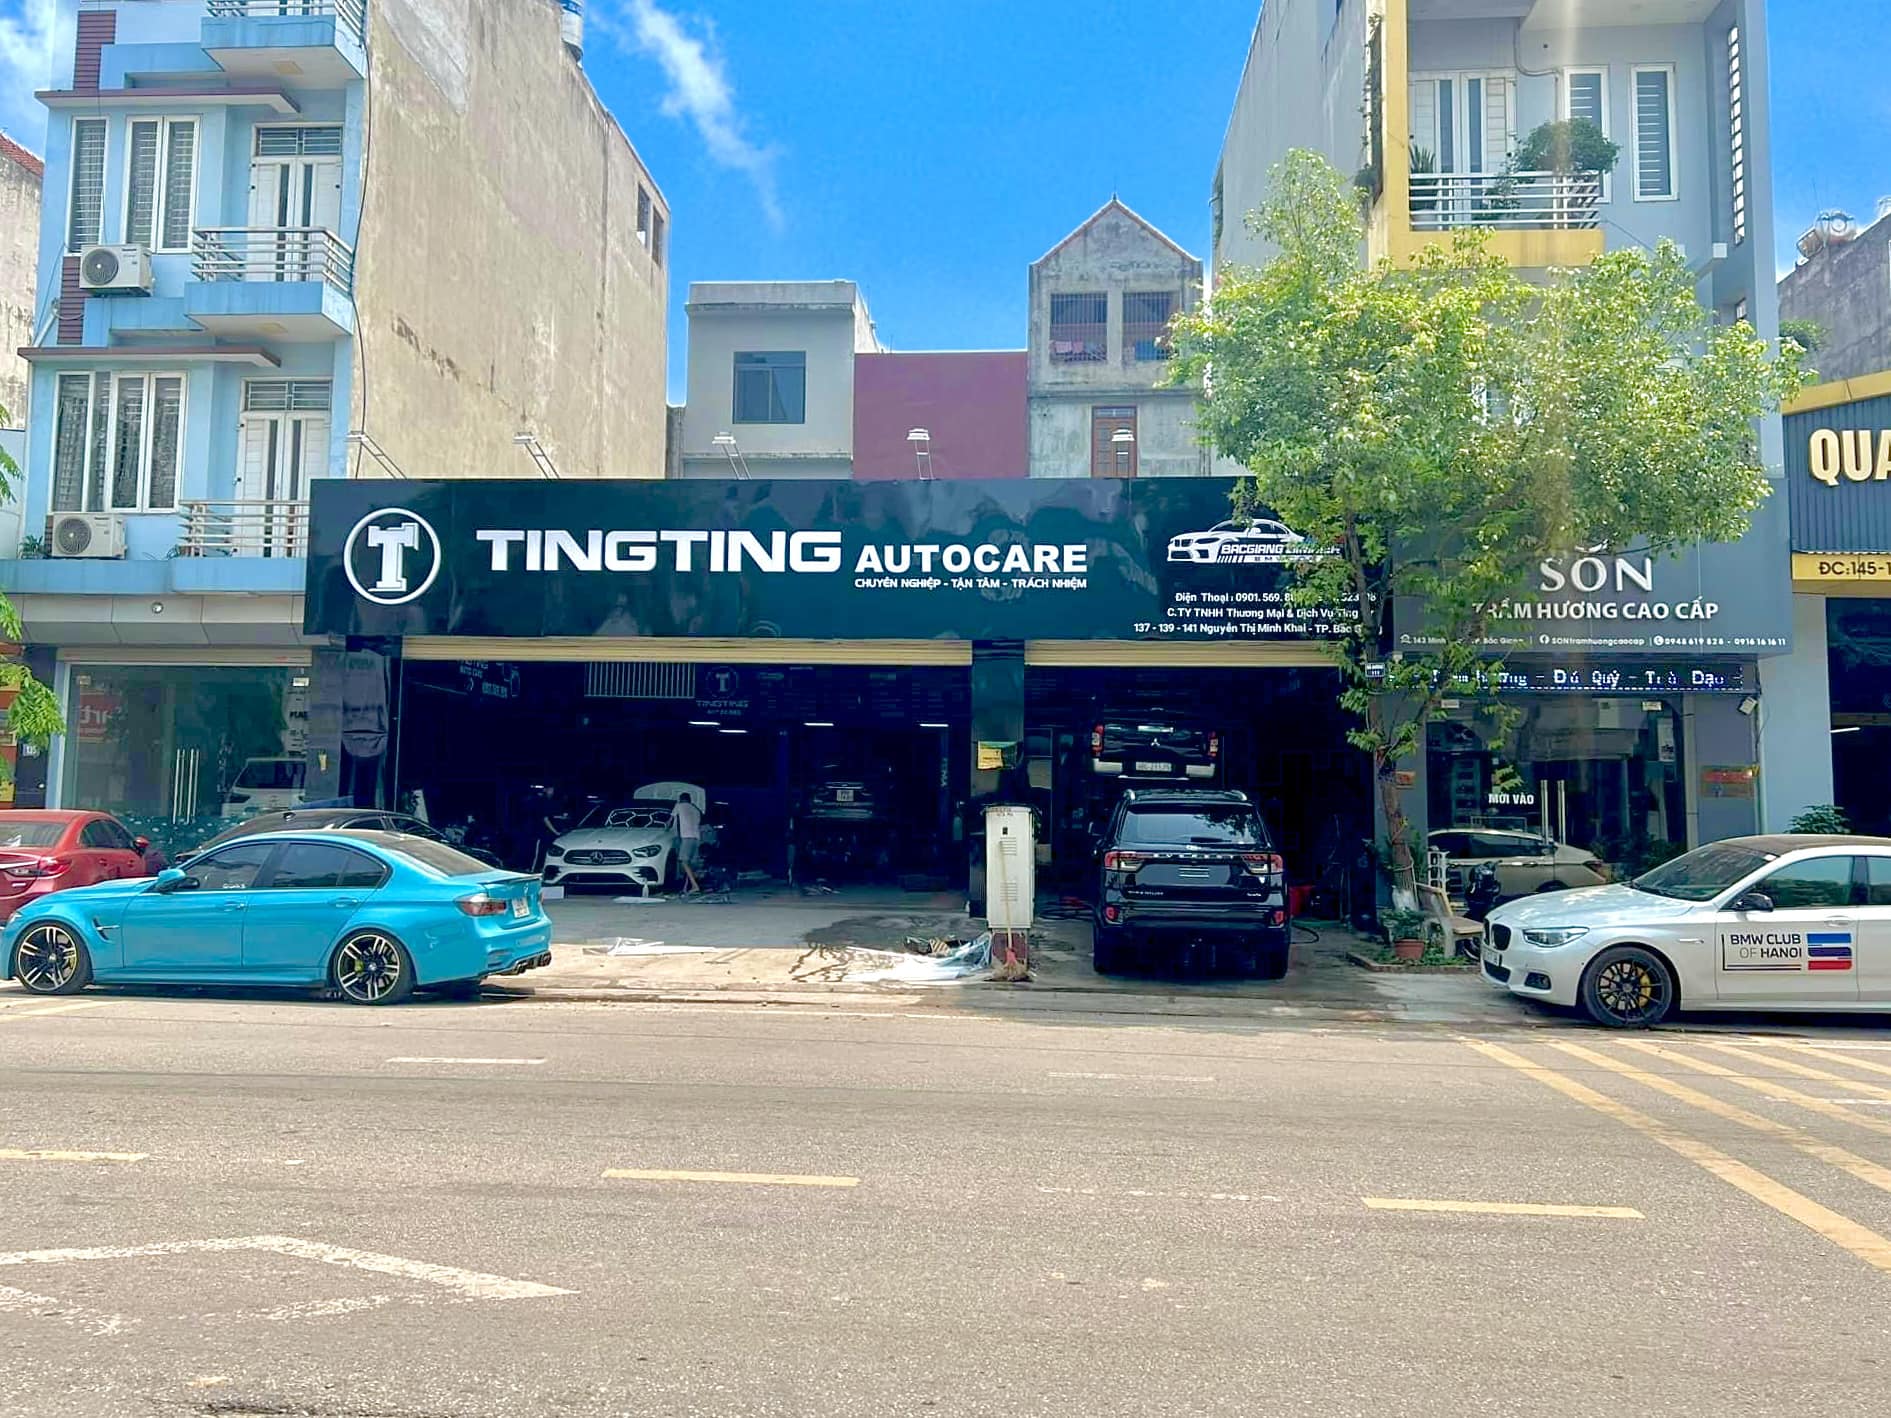 Ting Ting Auto Care ảnh 1